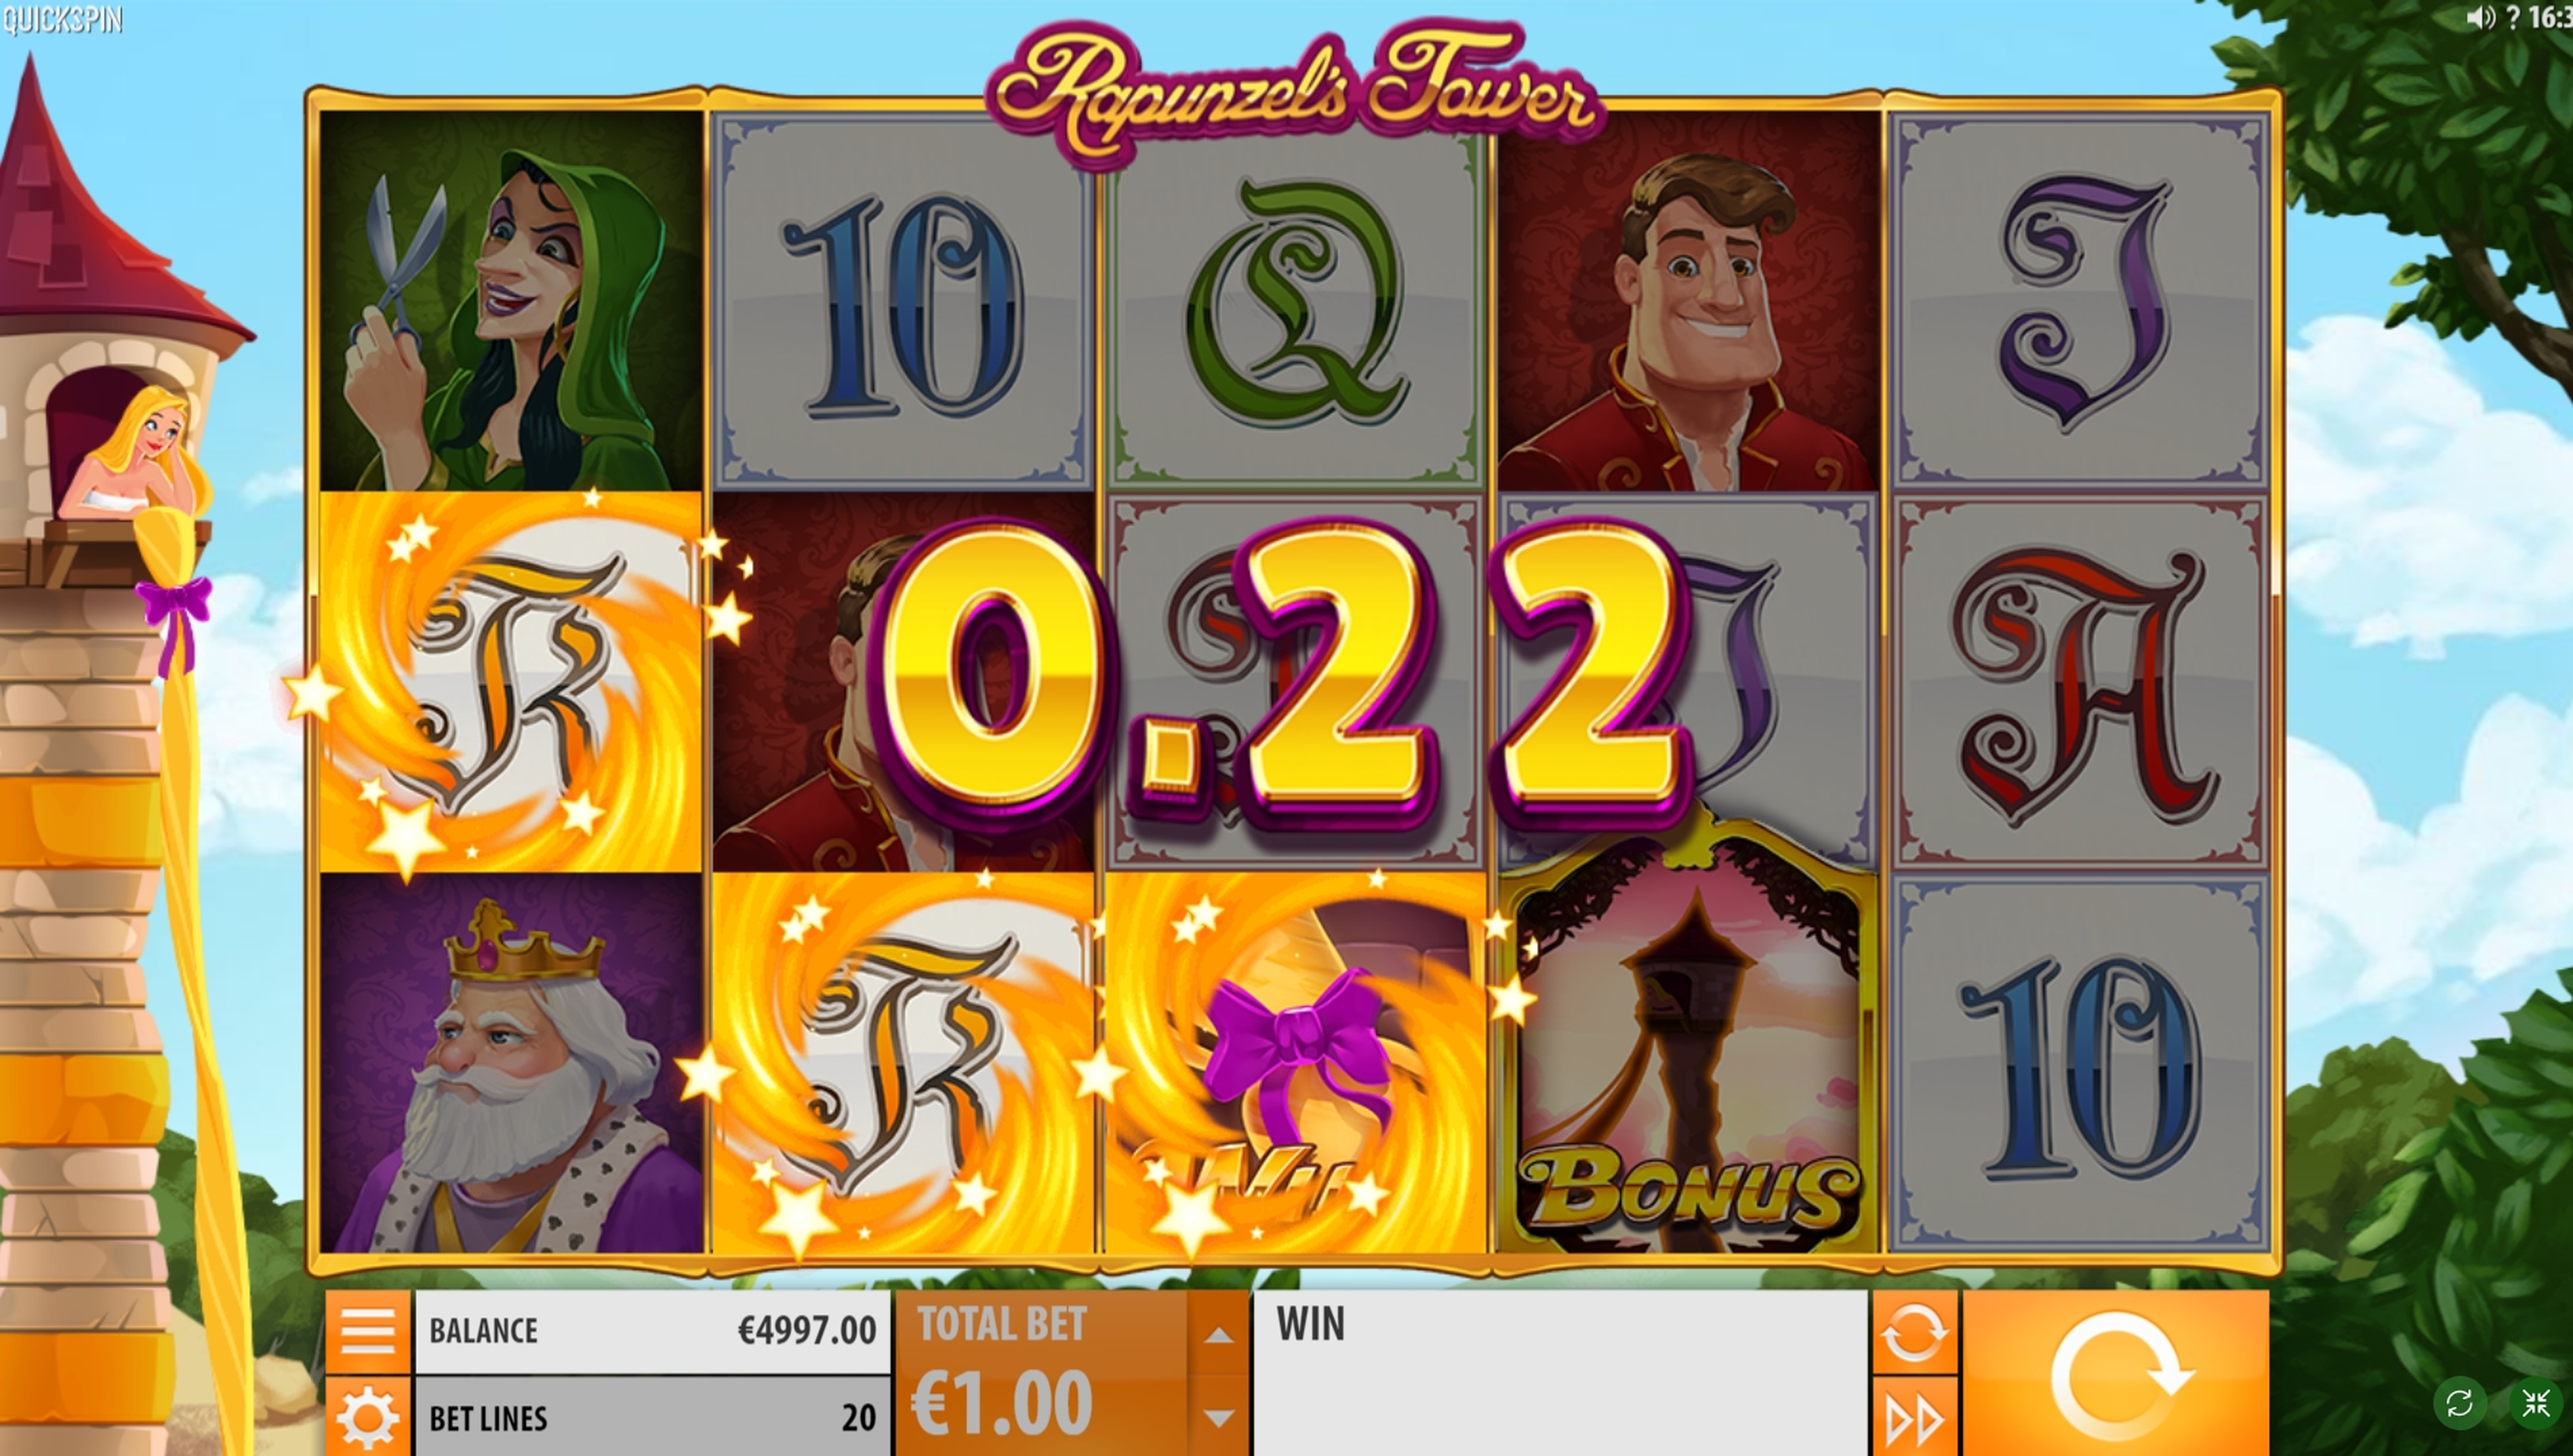 Win Money in Rapunzel's Tower Free Slot Game by Quickspin